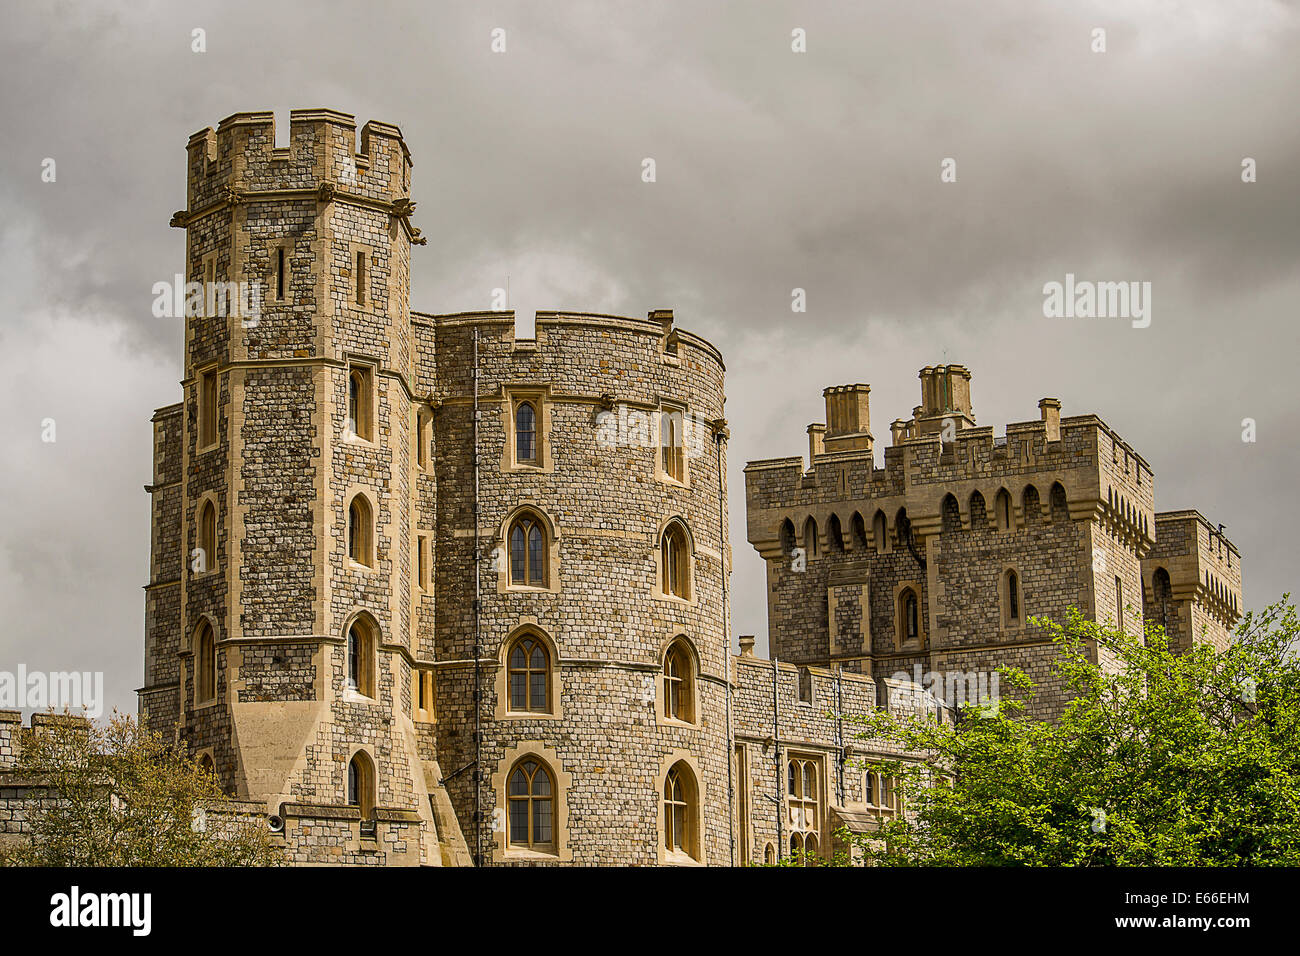 Image of the beautiful Windsor castle in England. Stock Photo